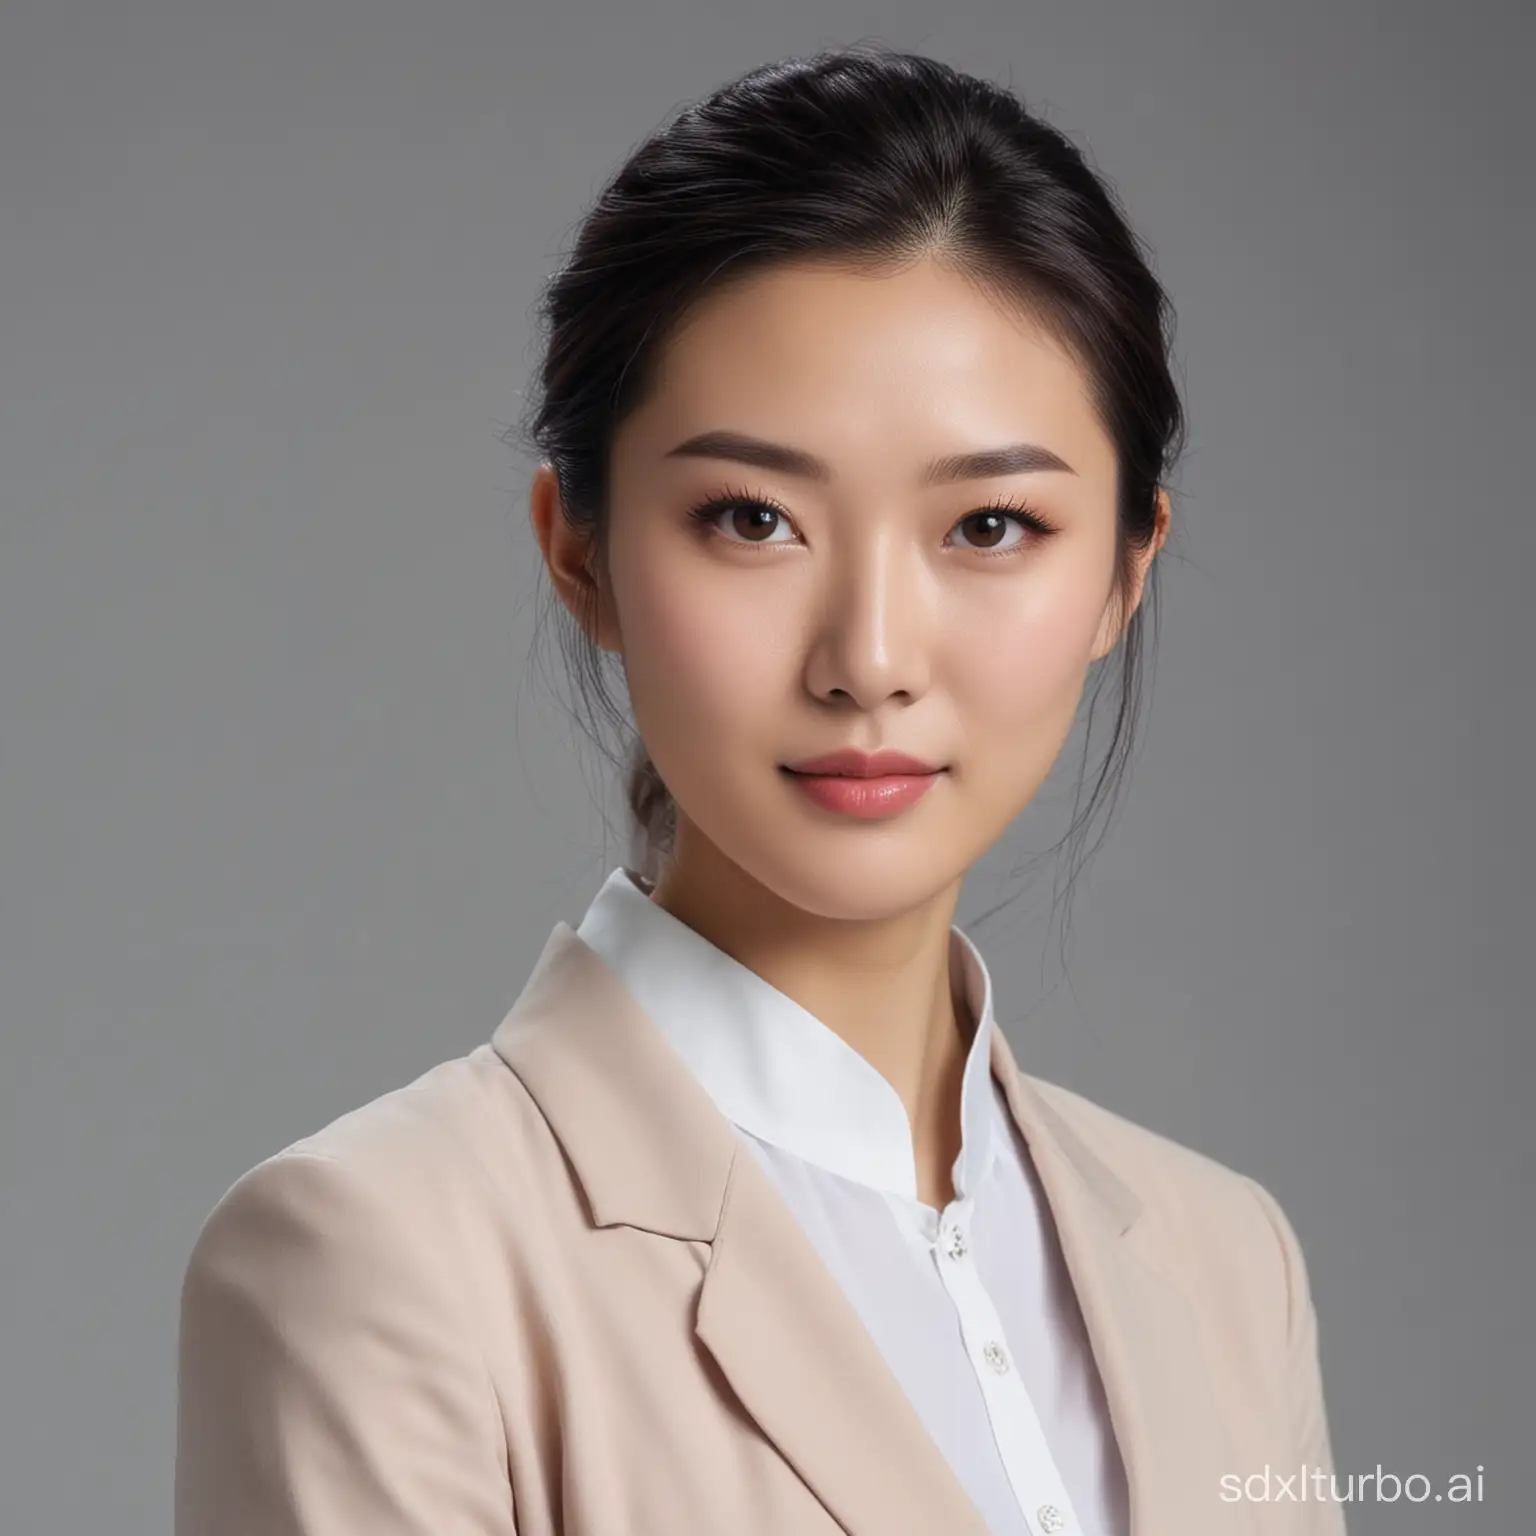 A Chinese beauty in professional attire, looking at the camera, medium shot